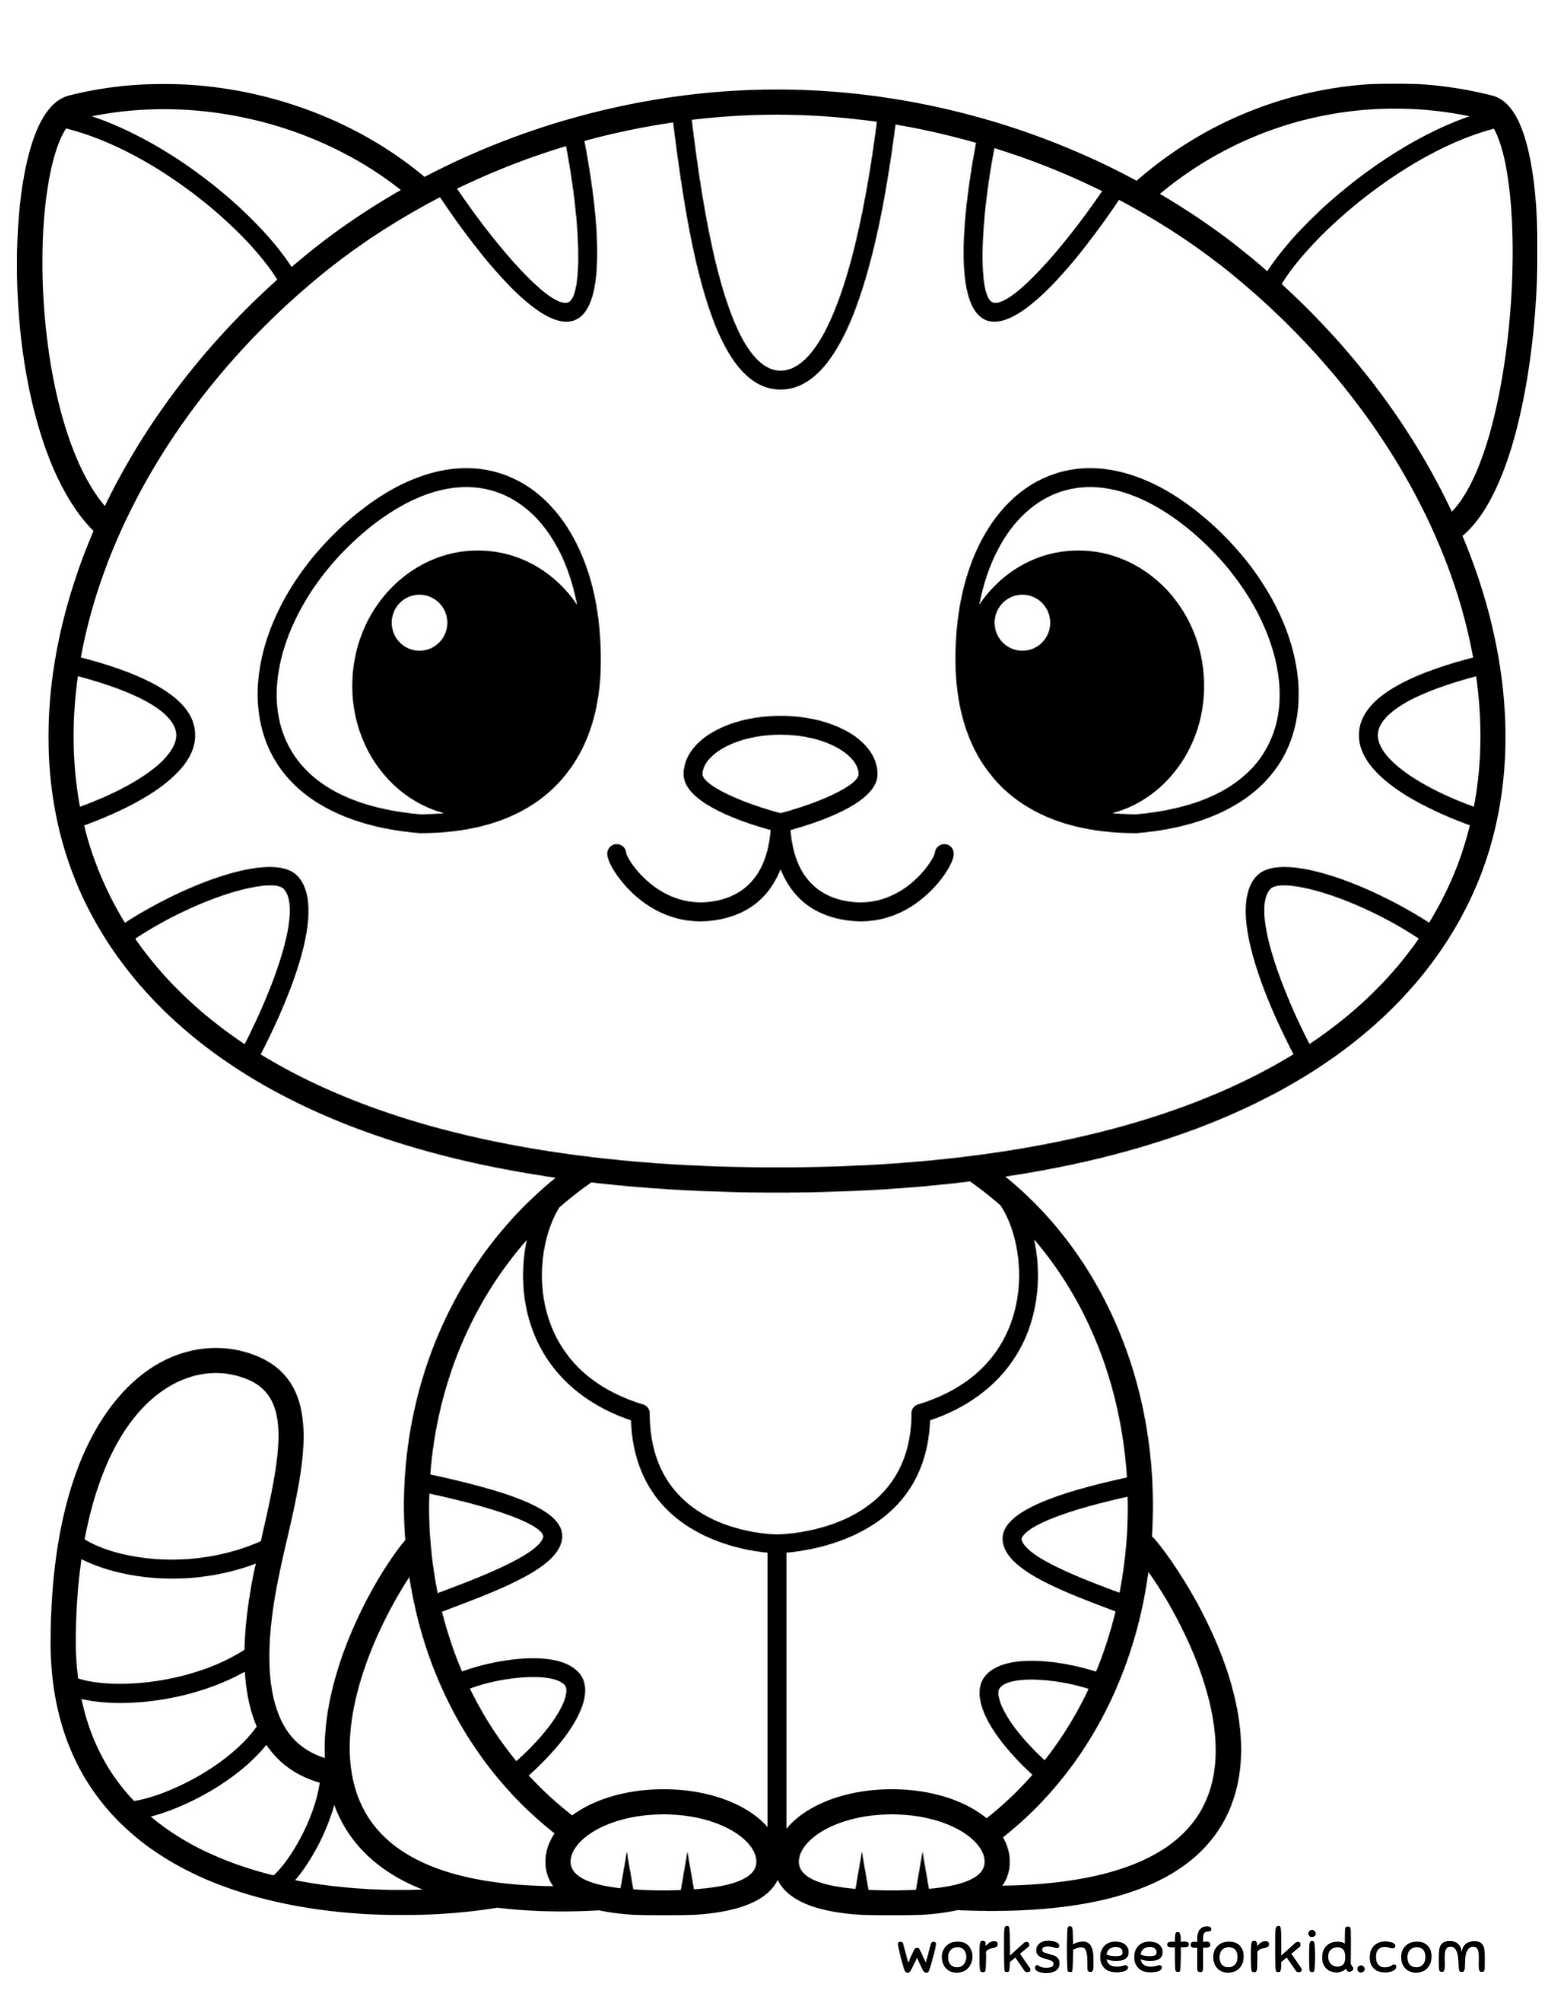 Free Animals Coloring Pages-17